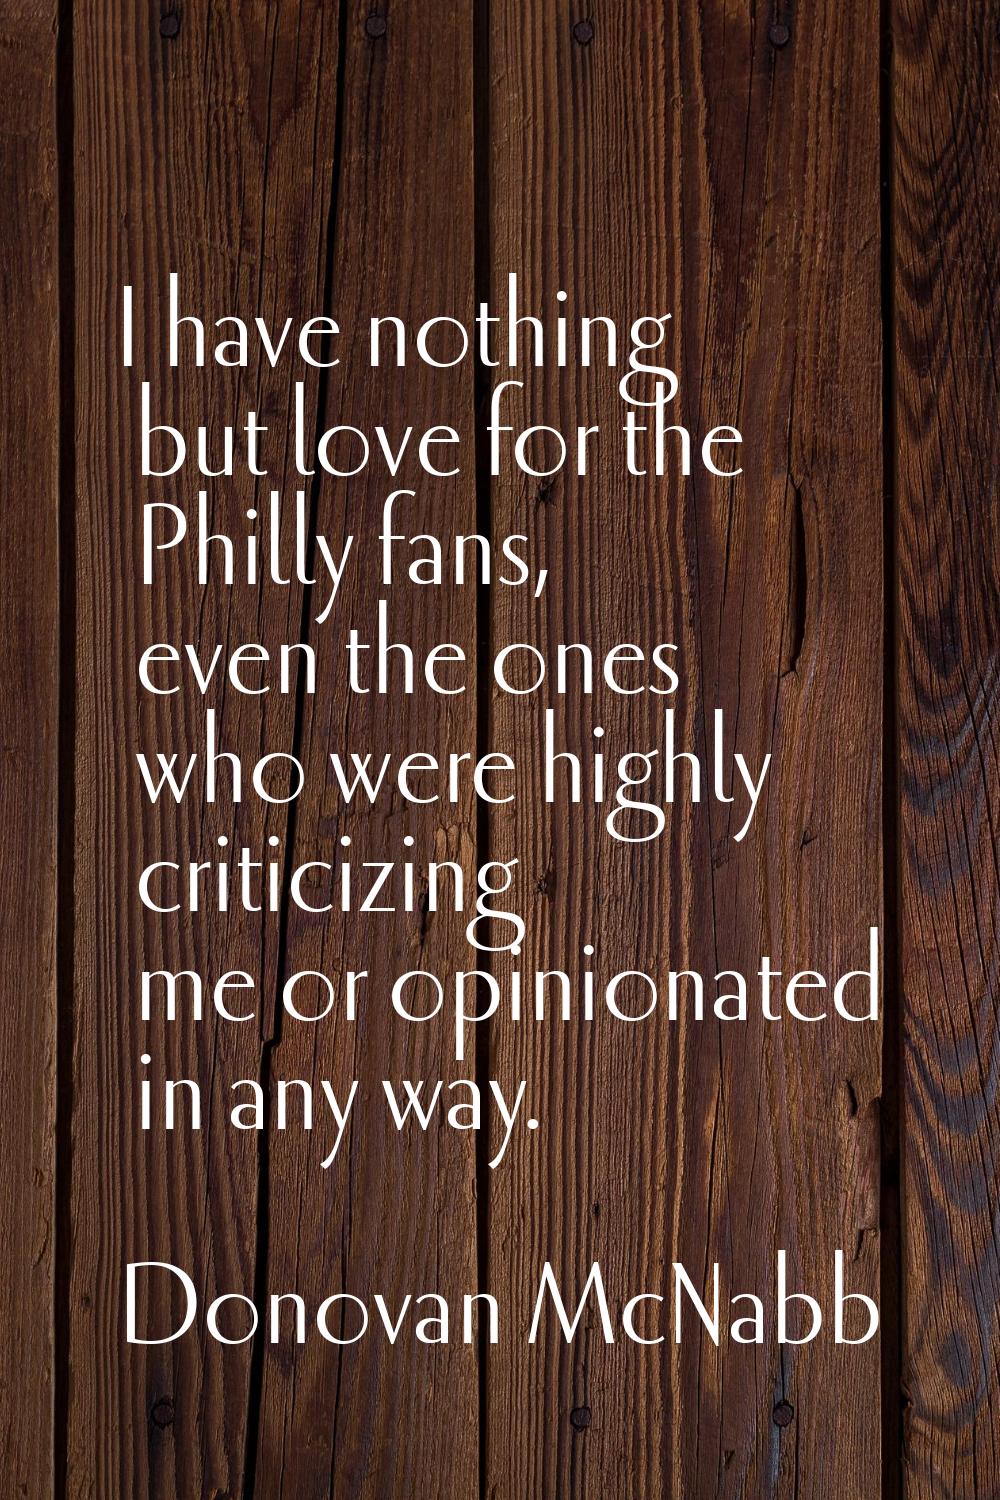 I have nothing but love for the Philly fans, even the ones who were highly criticizing me or opinio